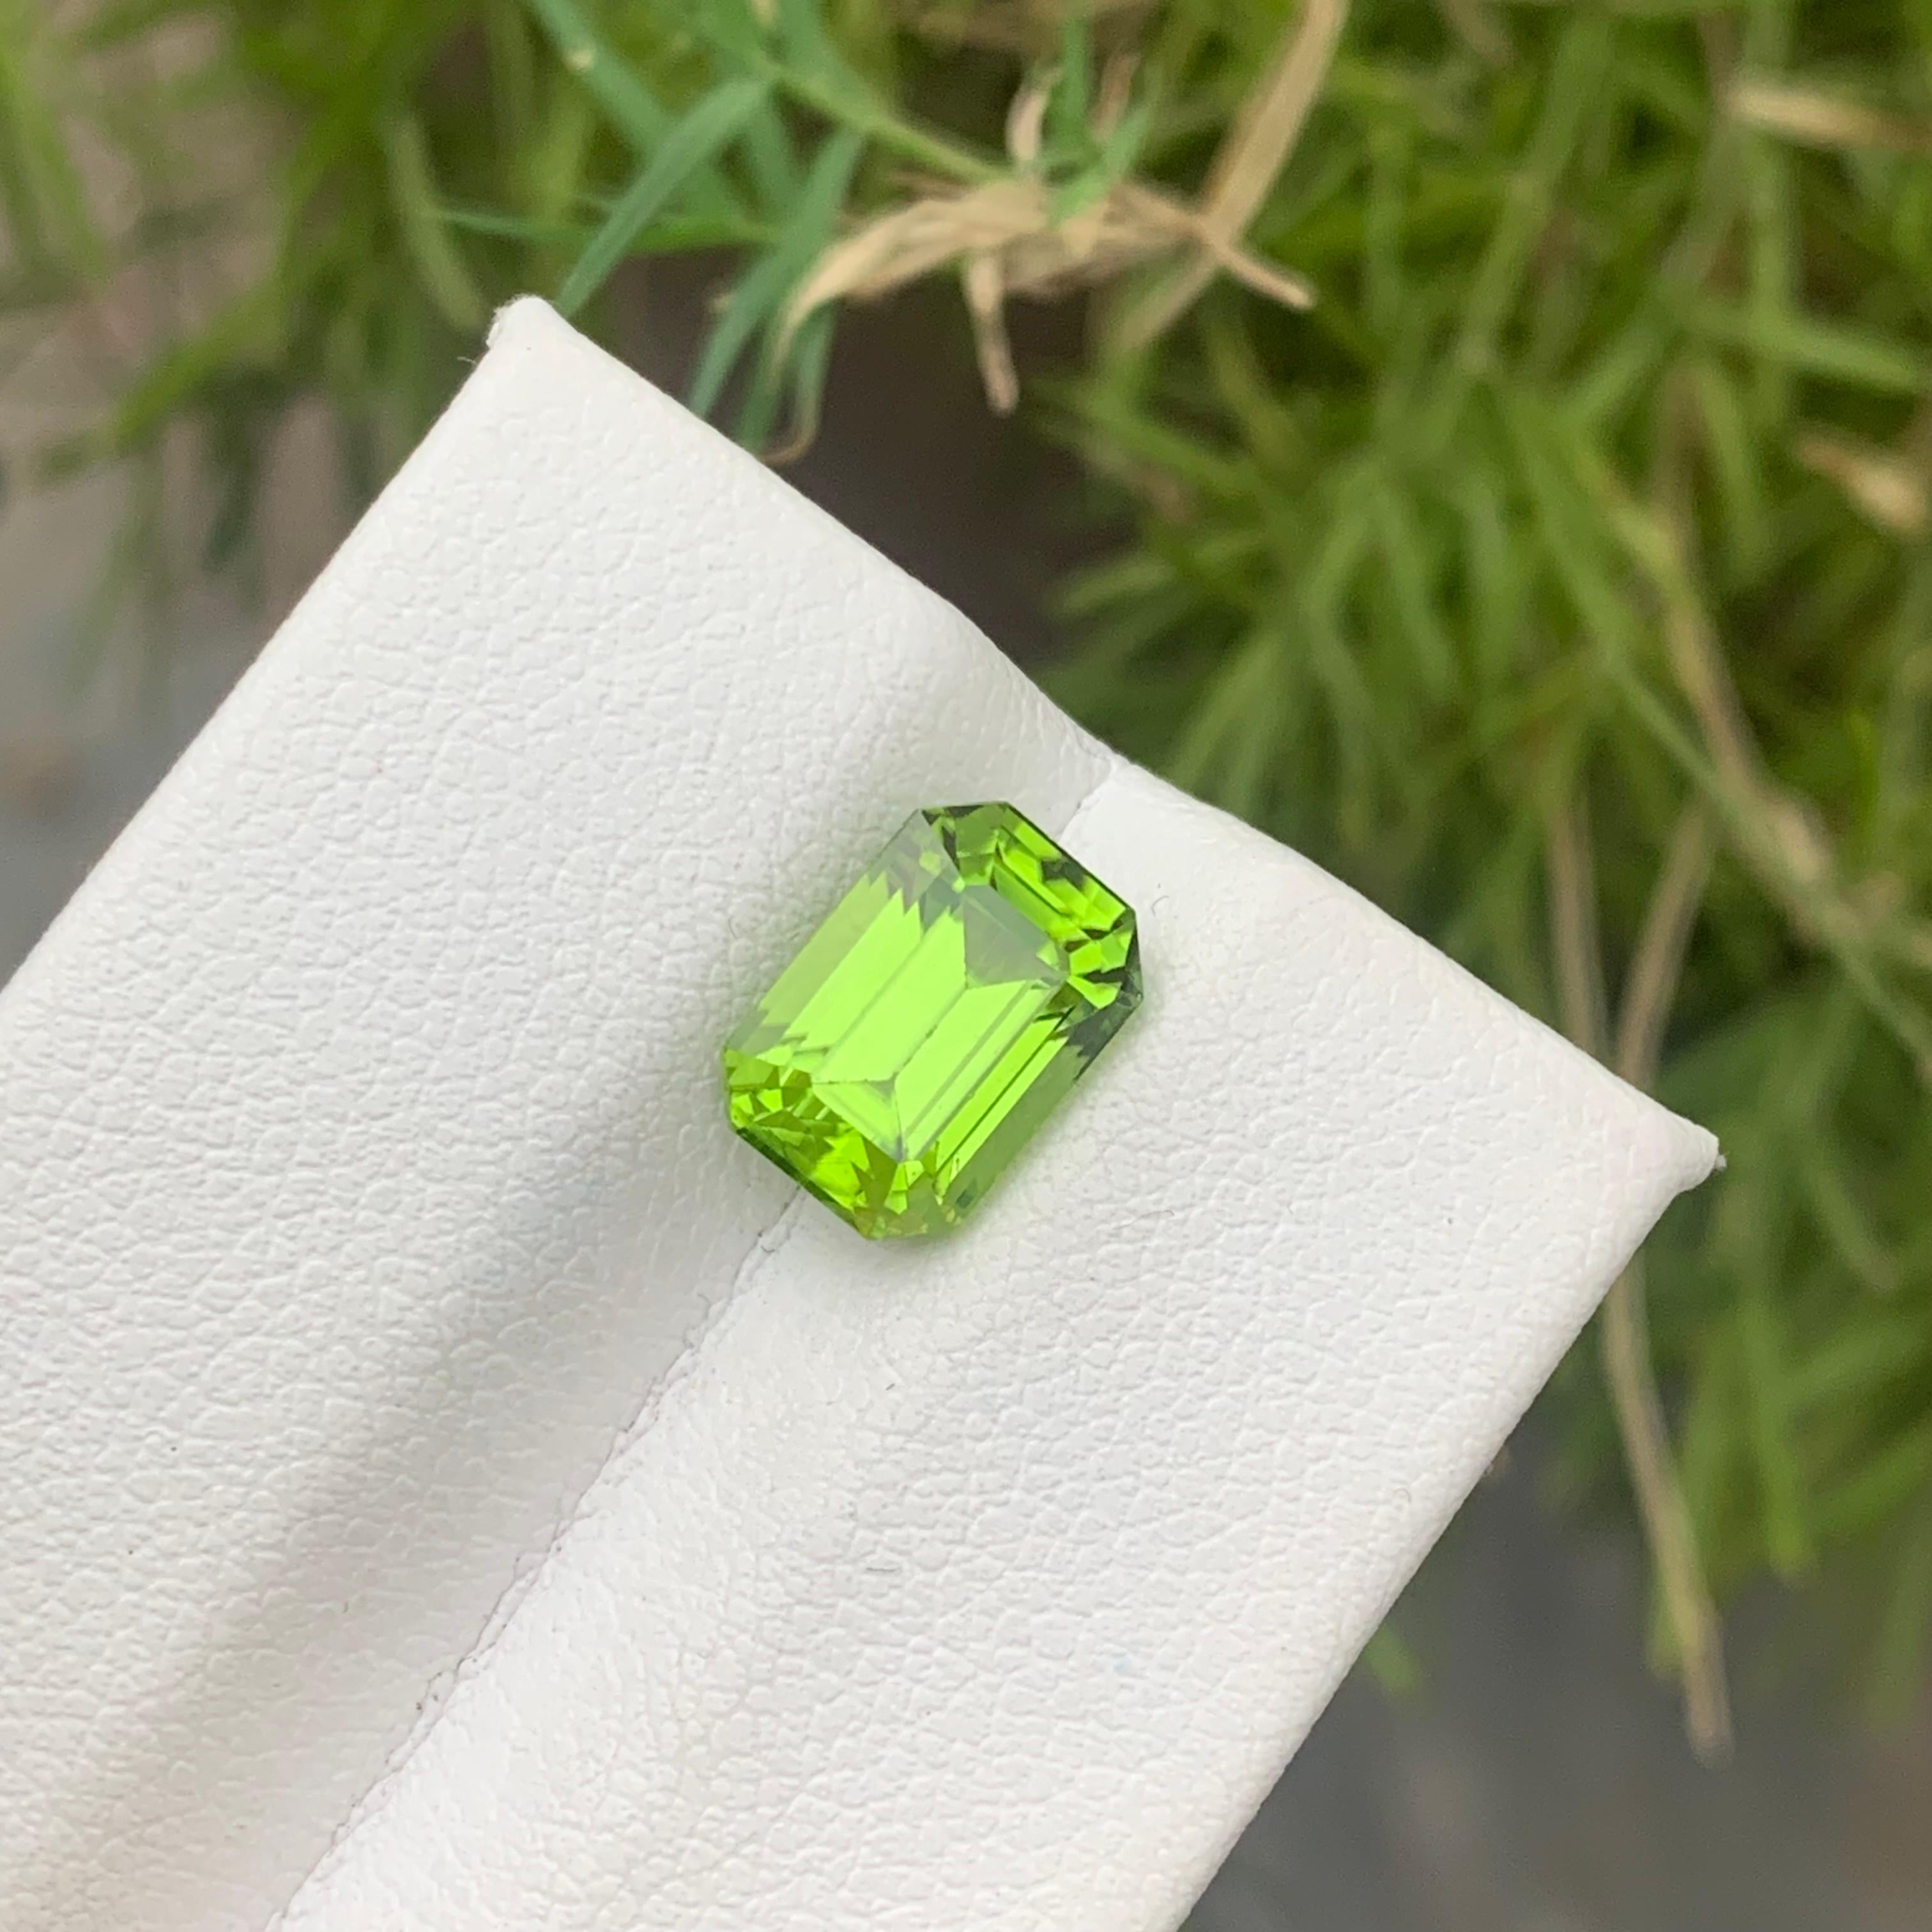 Gorgeous 3.35 Carat Natural Loose Green Peridot Gemstone from Pakistani Mine For Sale 3